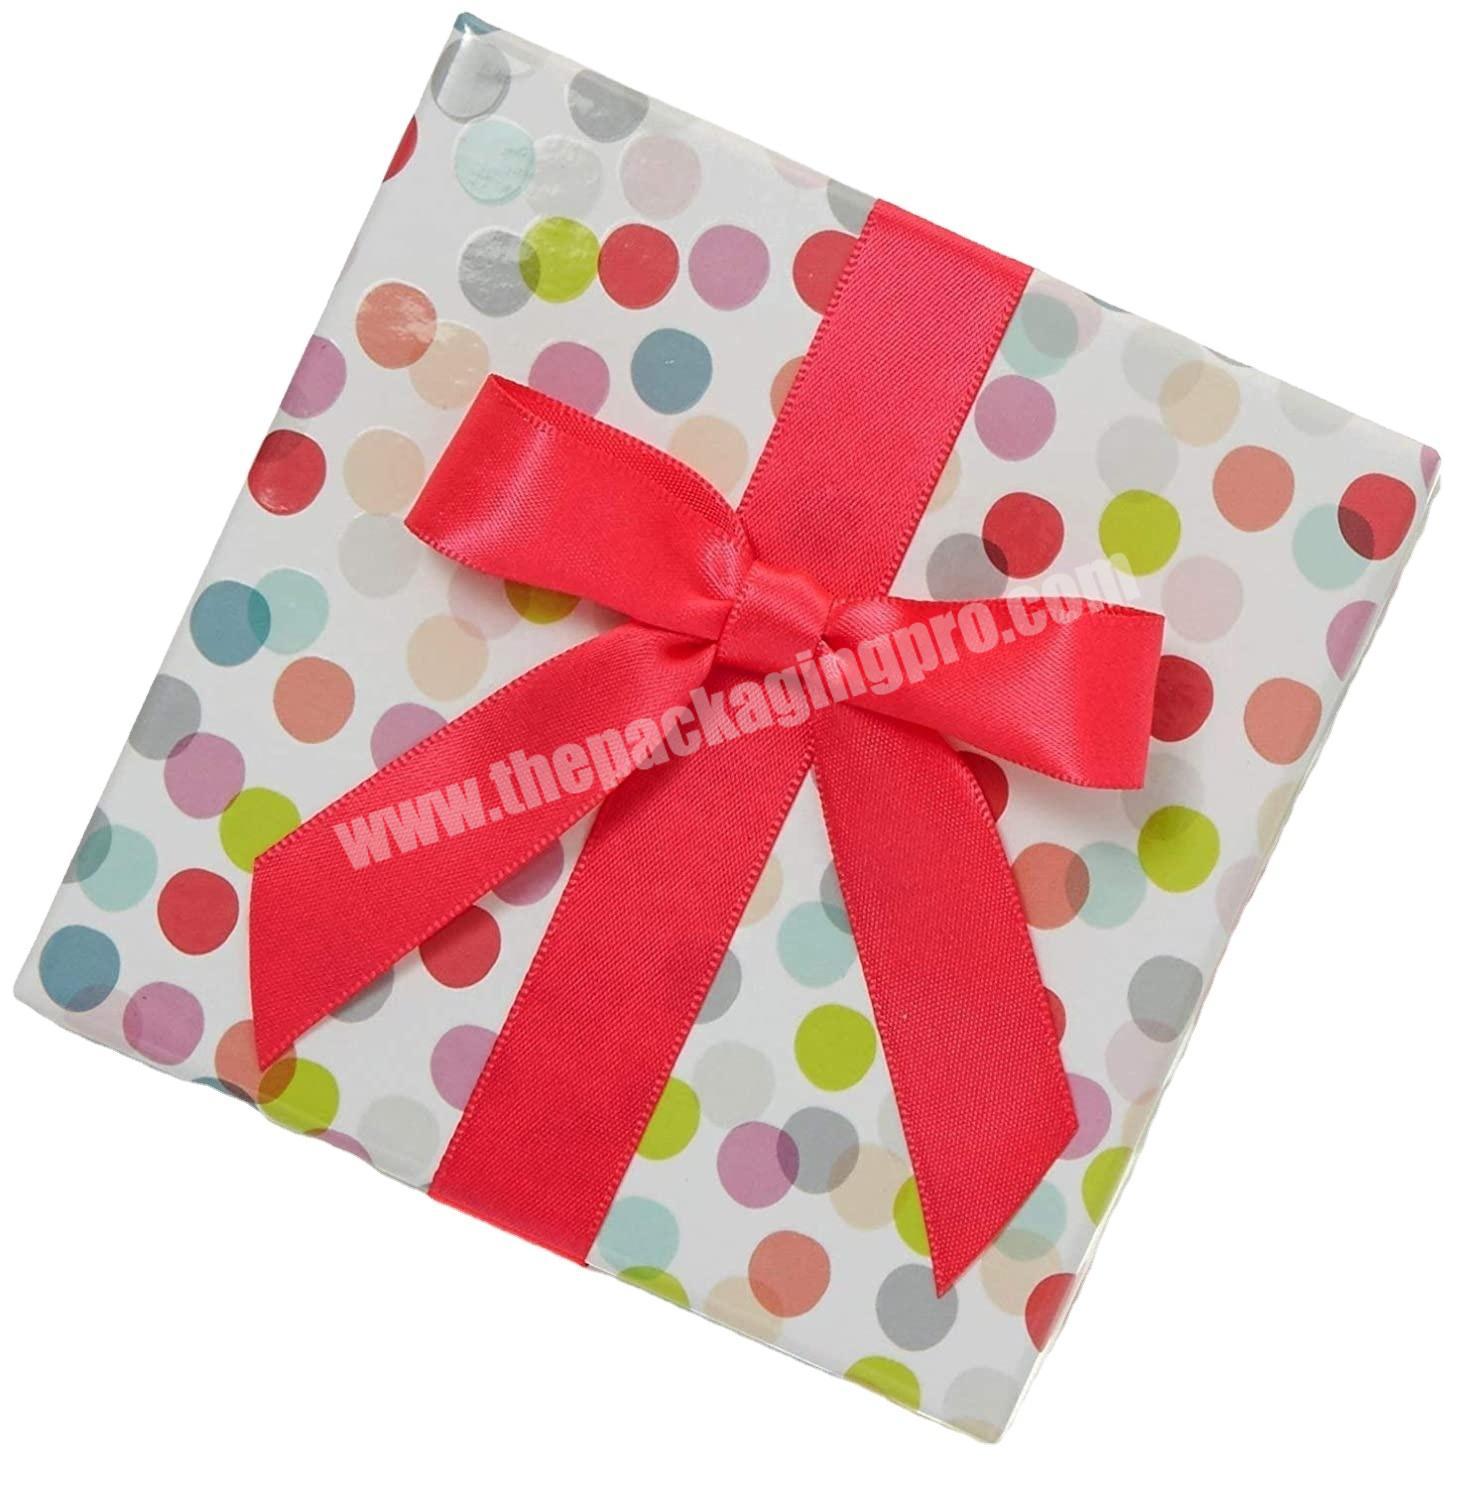 Customized birthday party gift box with colorful dots and bow